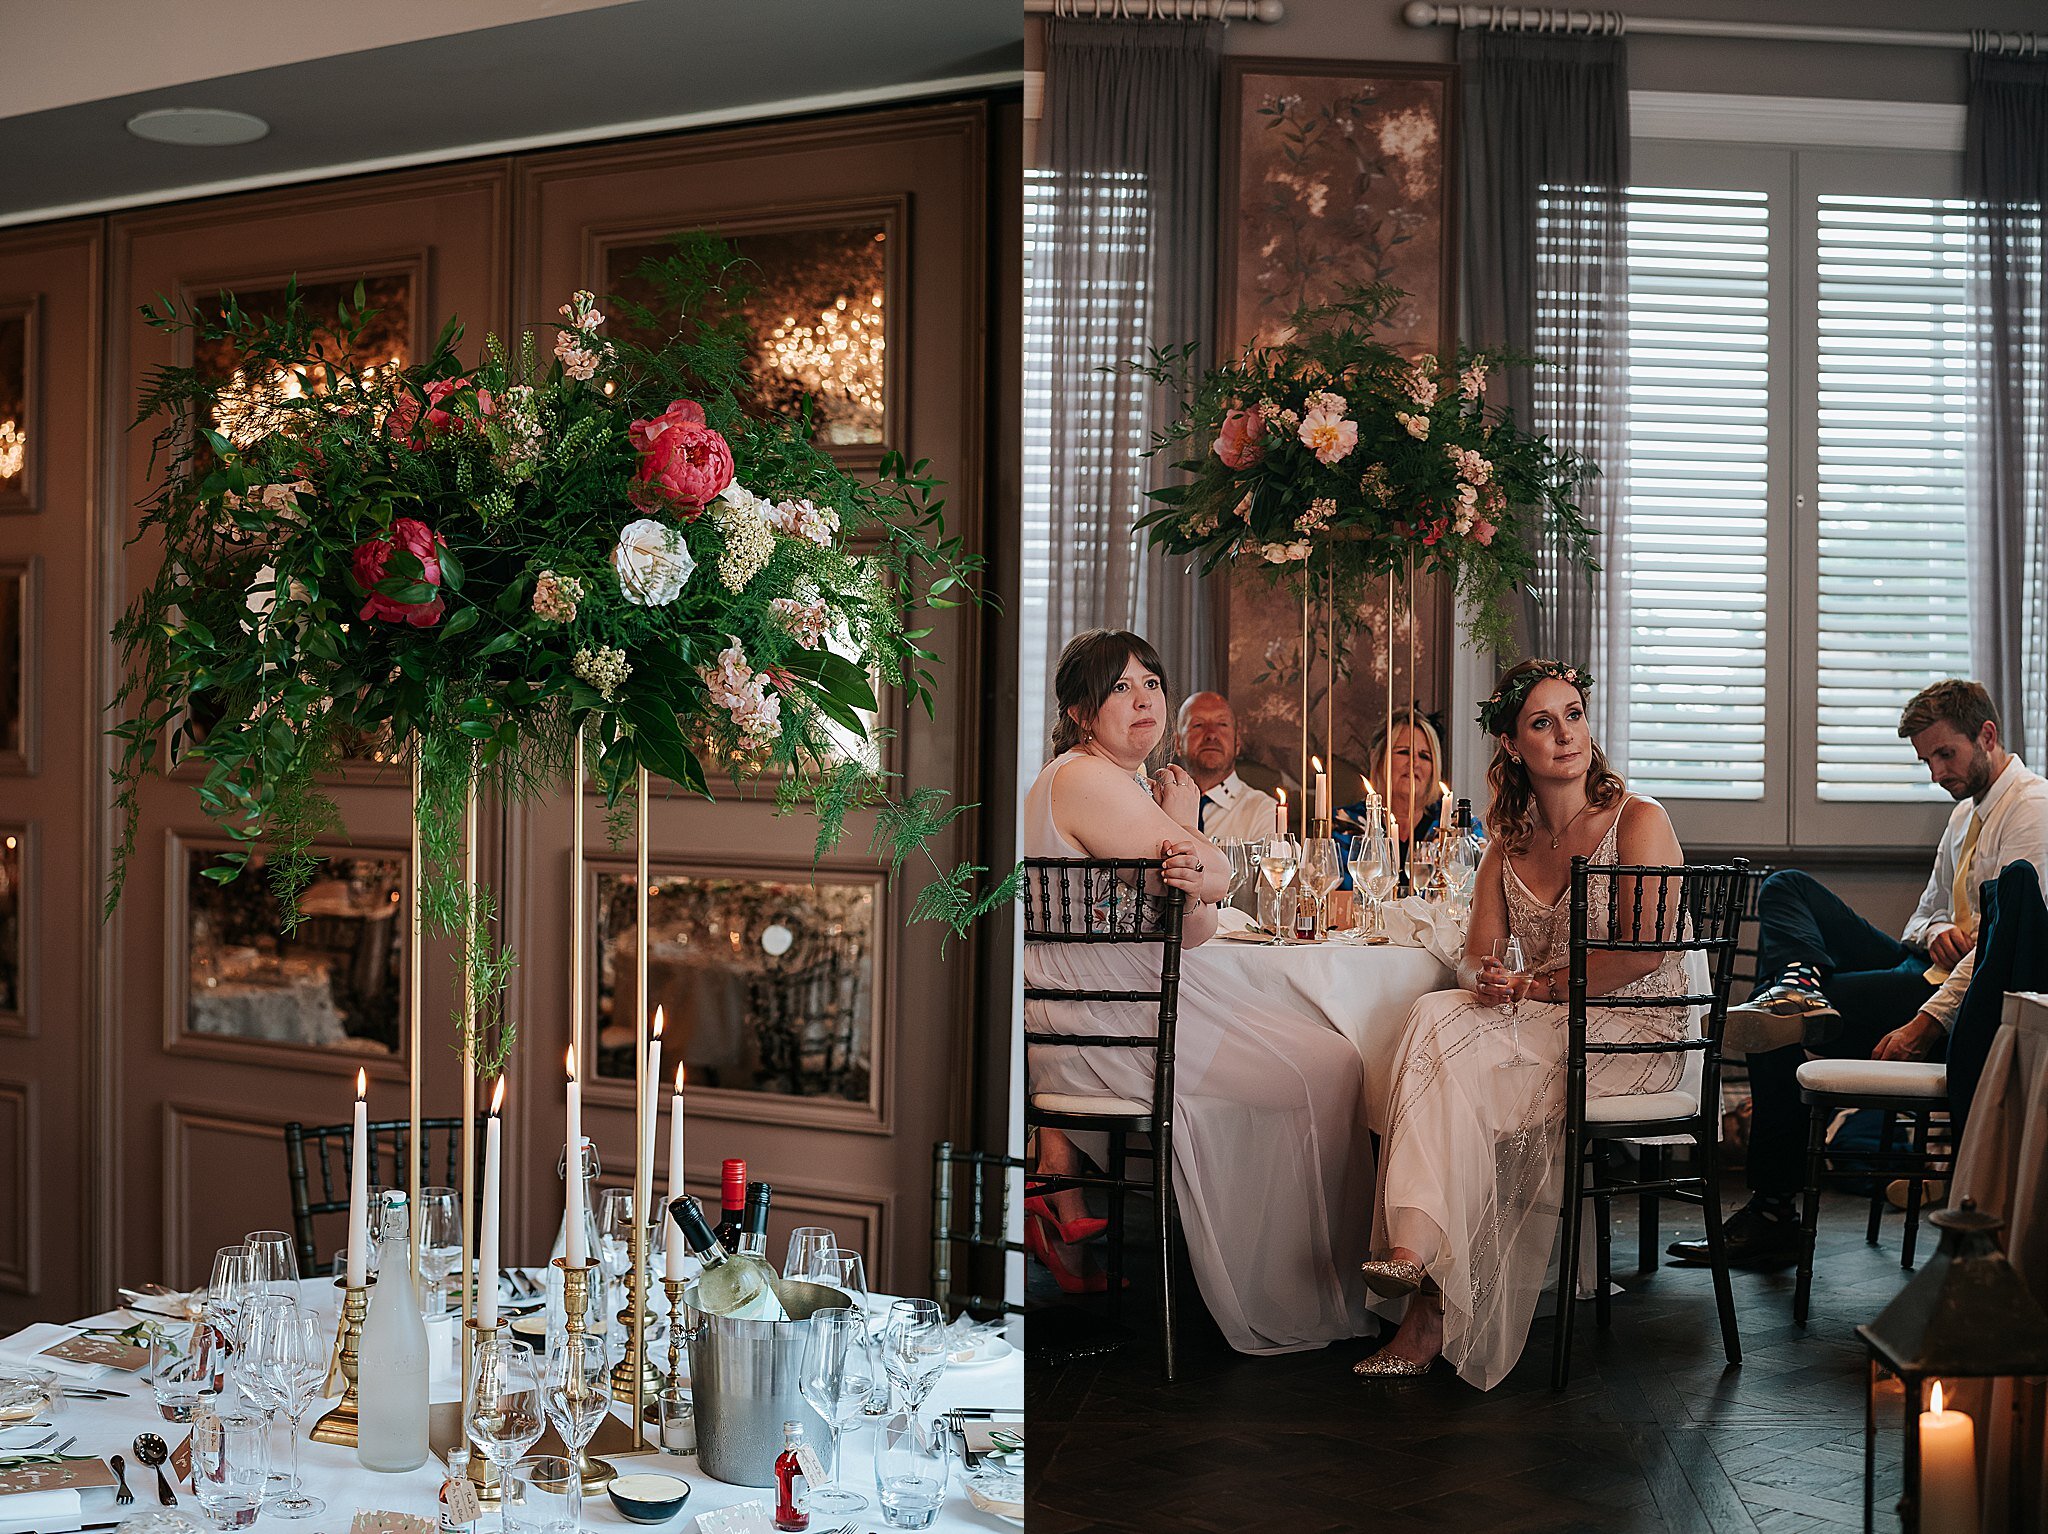 Summer wedding at the manor house, lindley, huddersfield